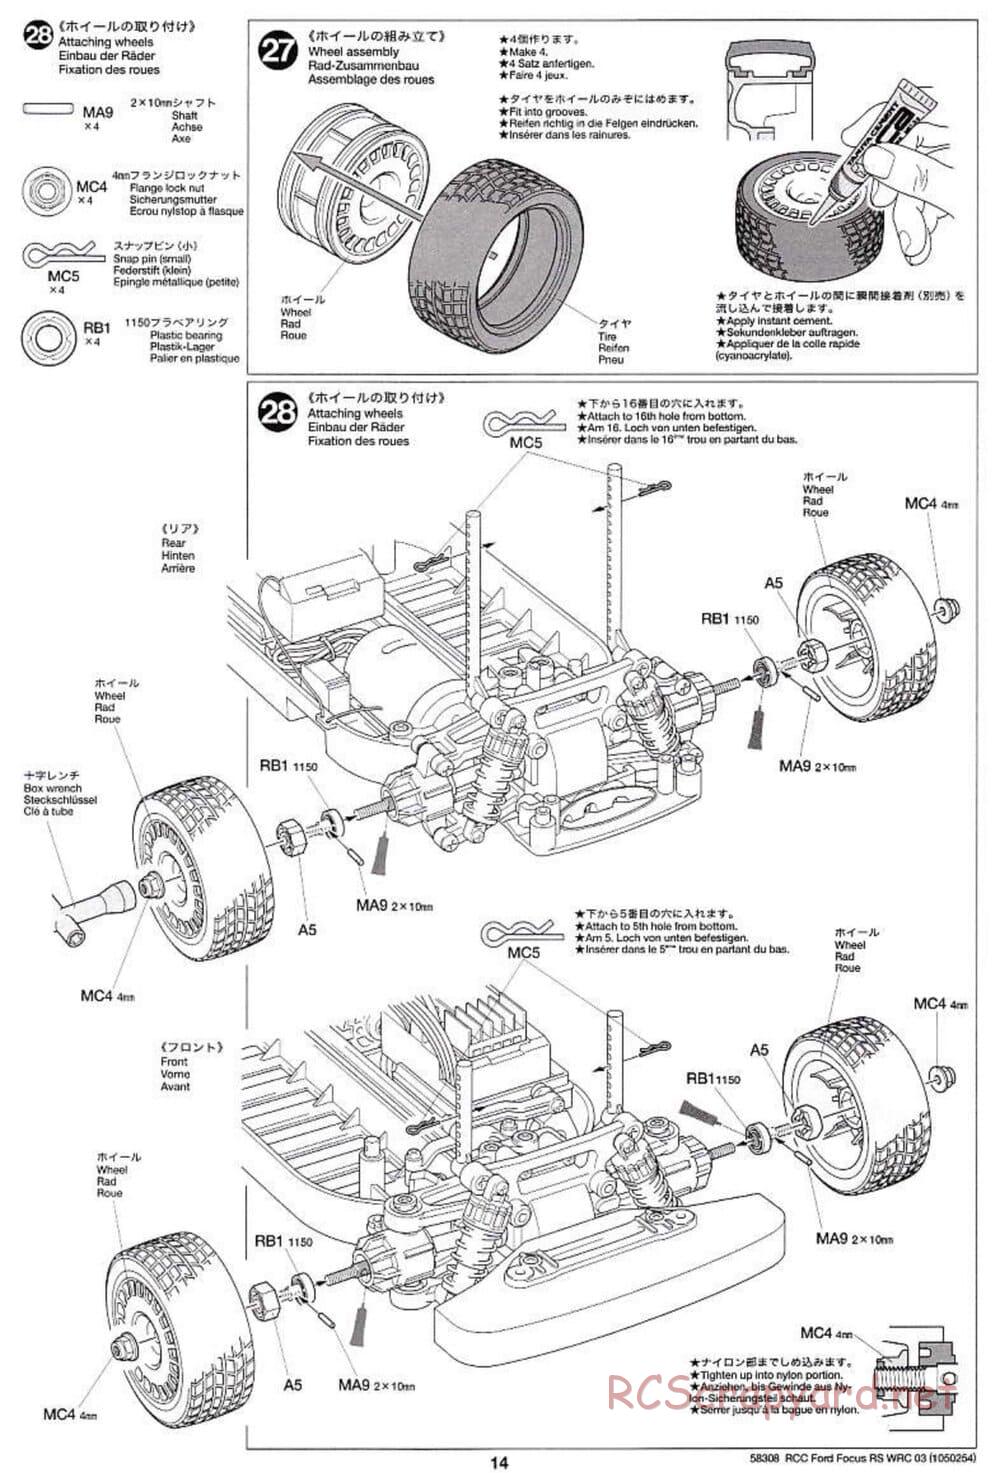 Tamiya - Ford Focus RS WRC 03 - TT-01 Chassis - Manual - Page 14